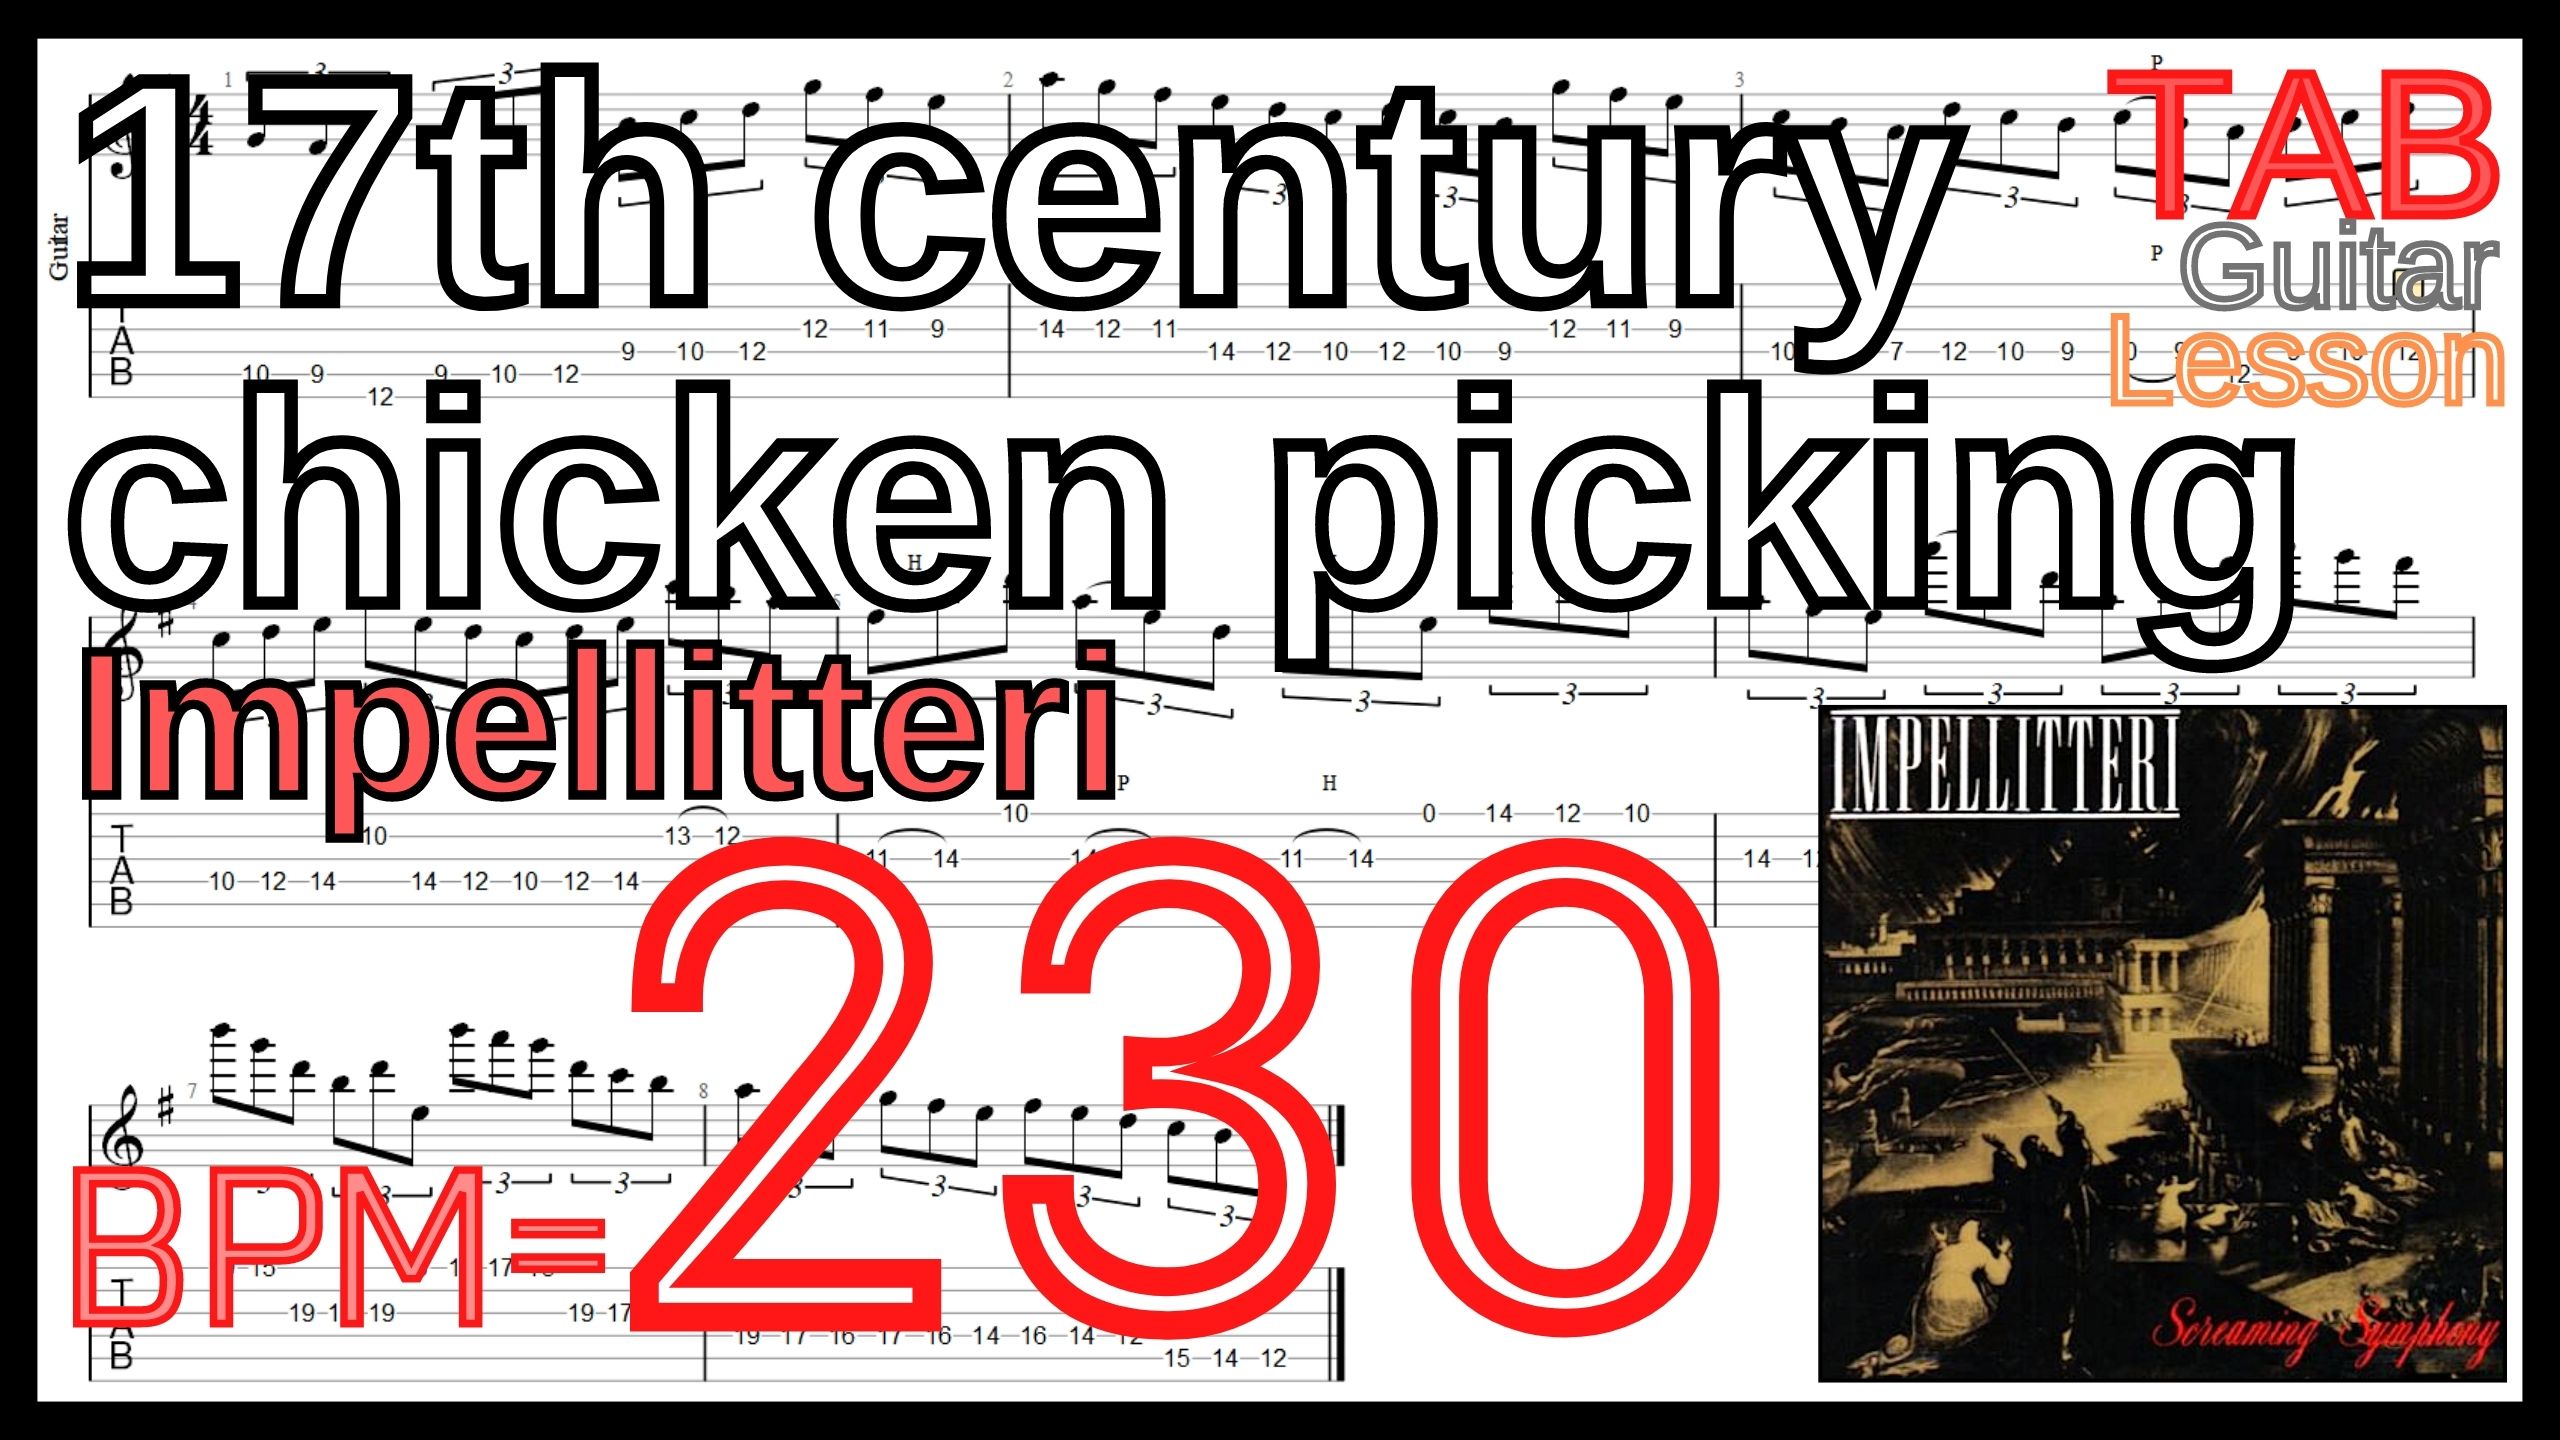 Guitar Picking Best Practice TAB3.17th century chicken picking / Impellitteri Guitar Lesson クリス・インペリテリ ギター練習